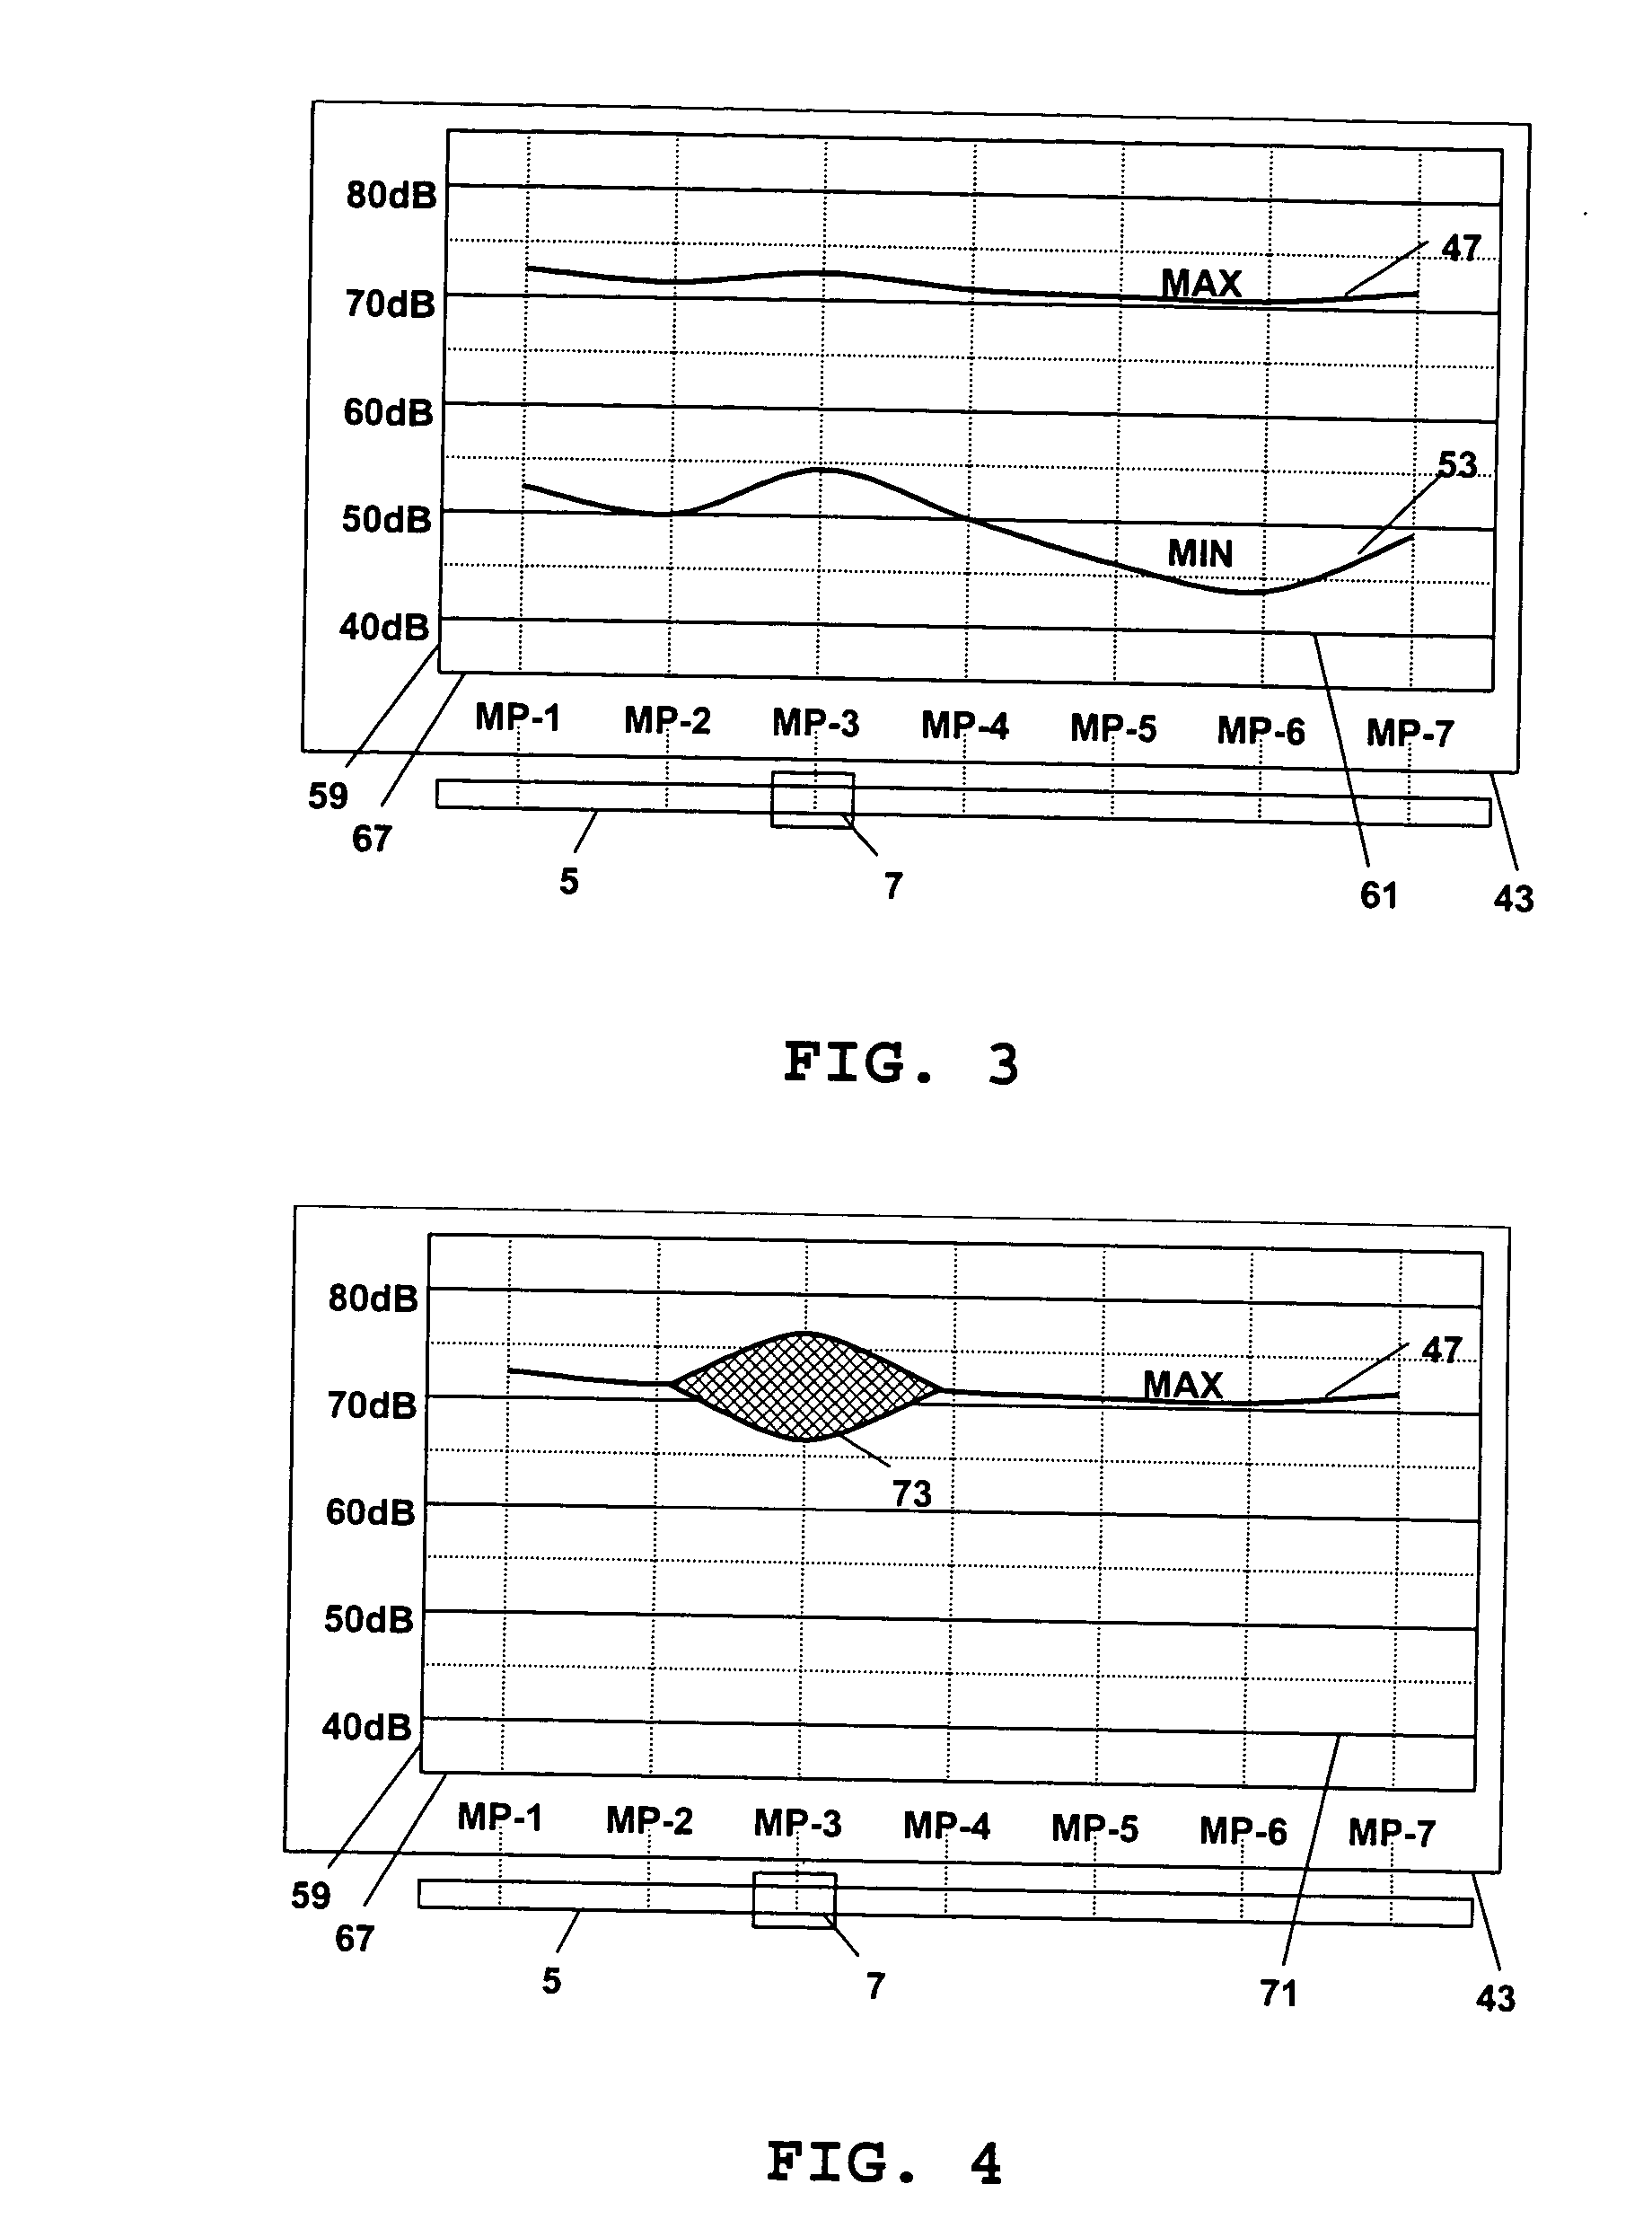 Method and apparatus for the location and indication of cable splices and cable faults